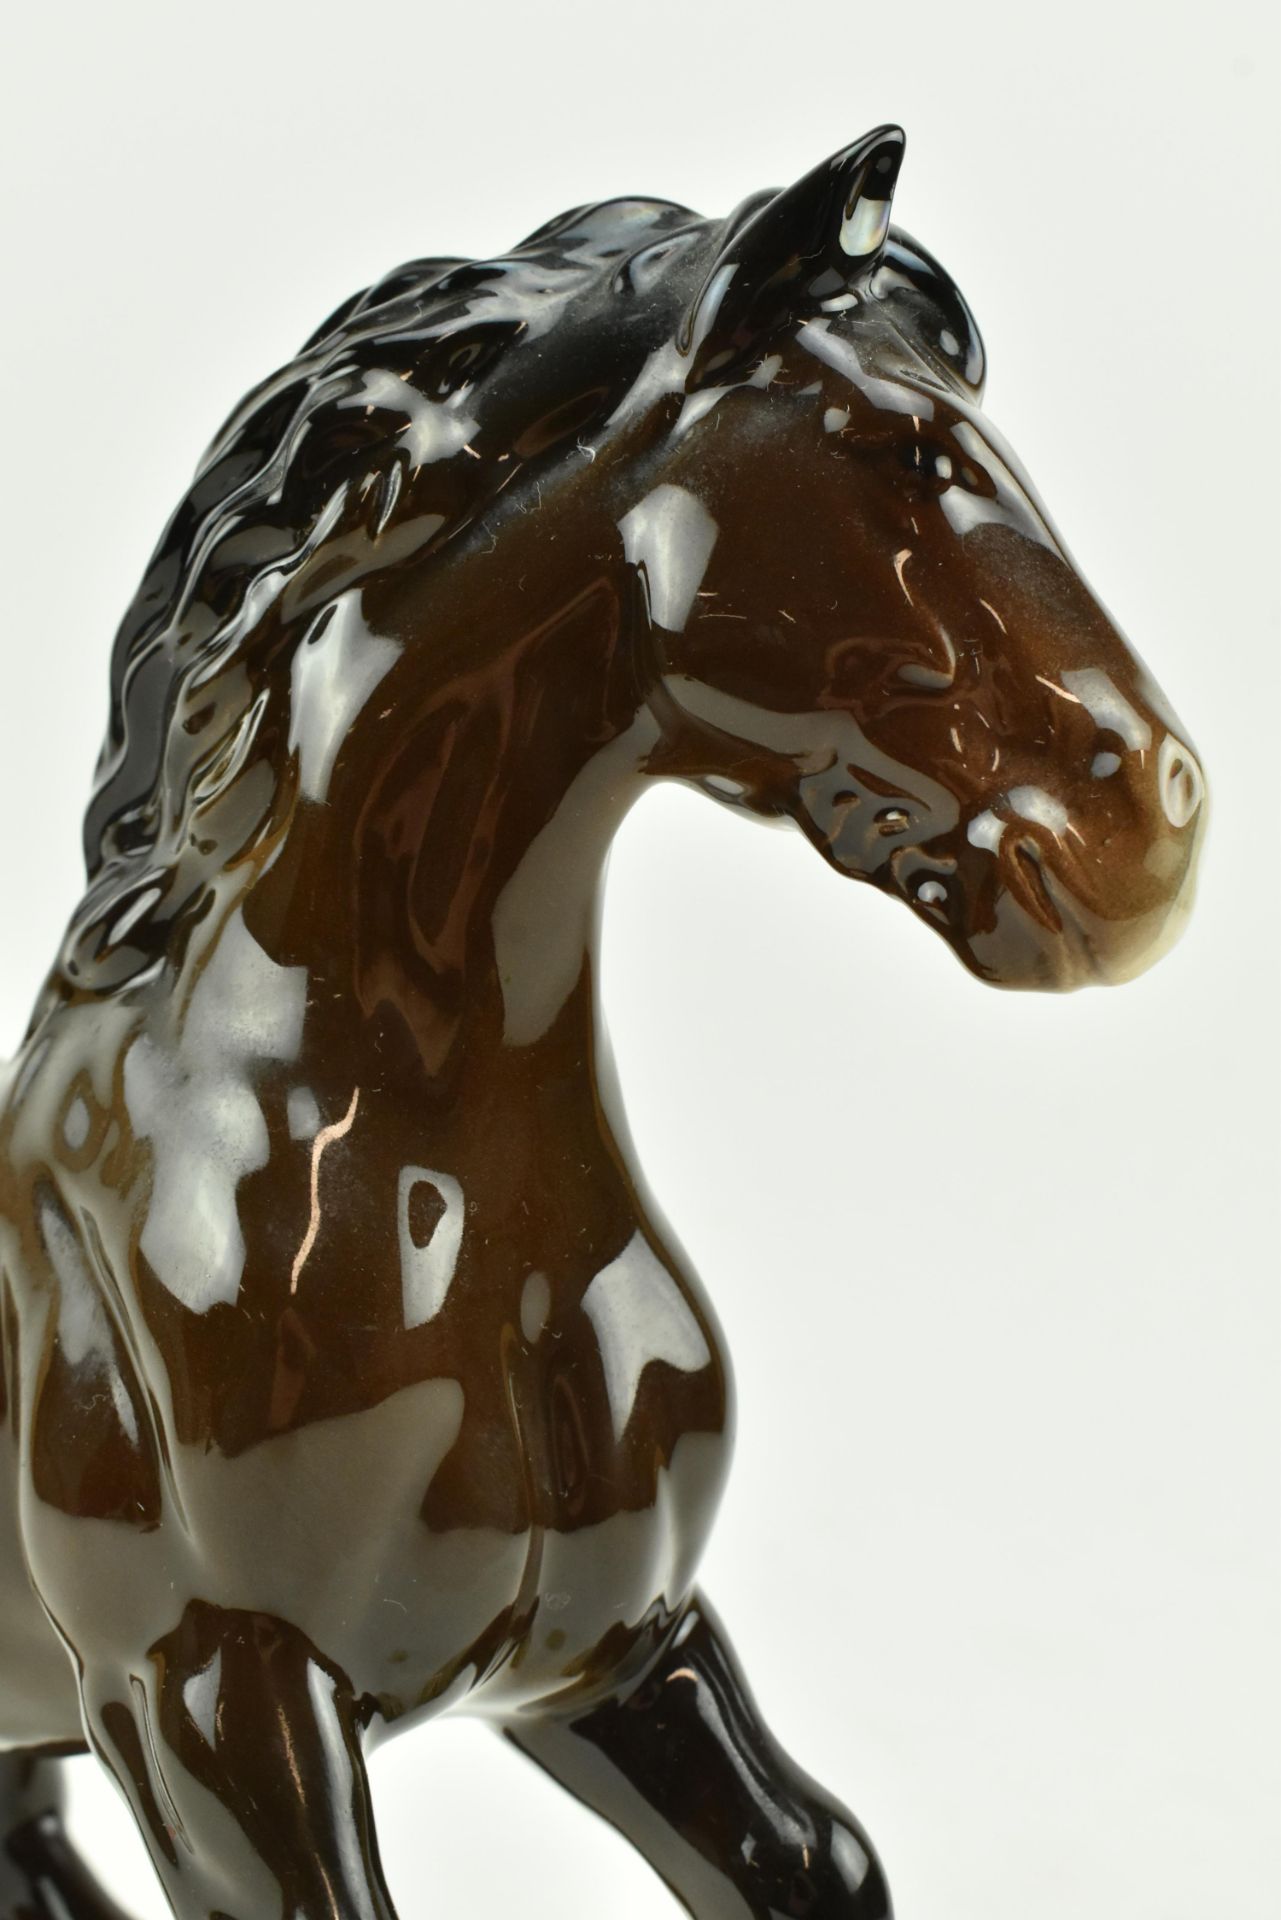 BESWICK - 20TH CENTURY PORCELAIN FIGURINE OF A SHIRE HORSE - Image 3 of 4